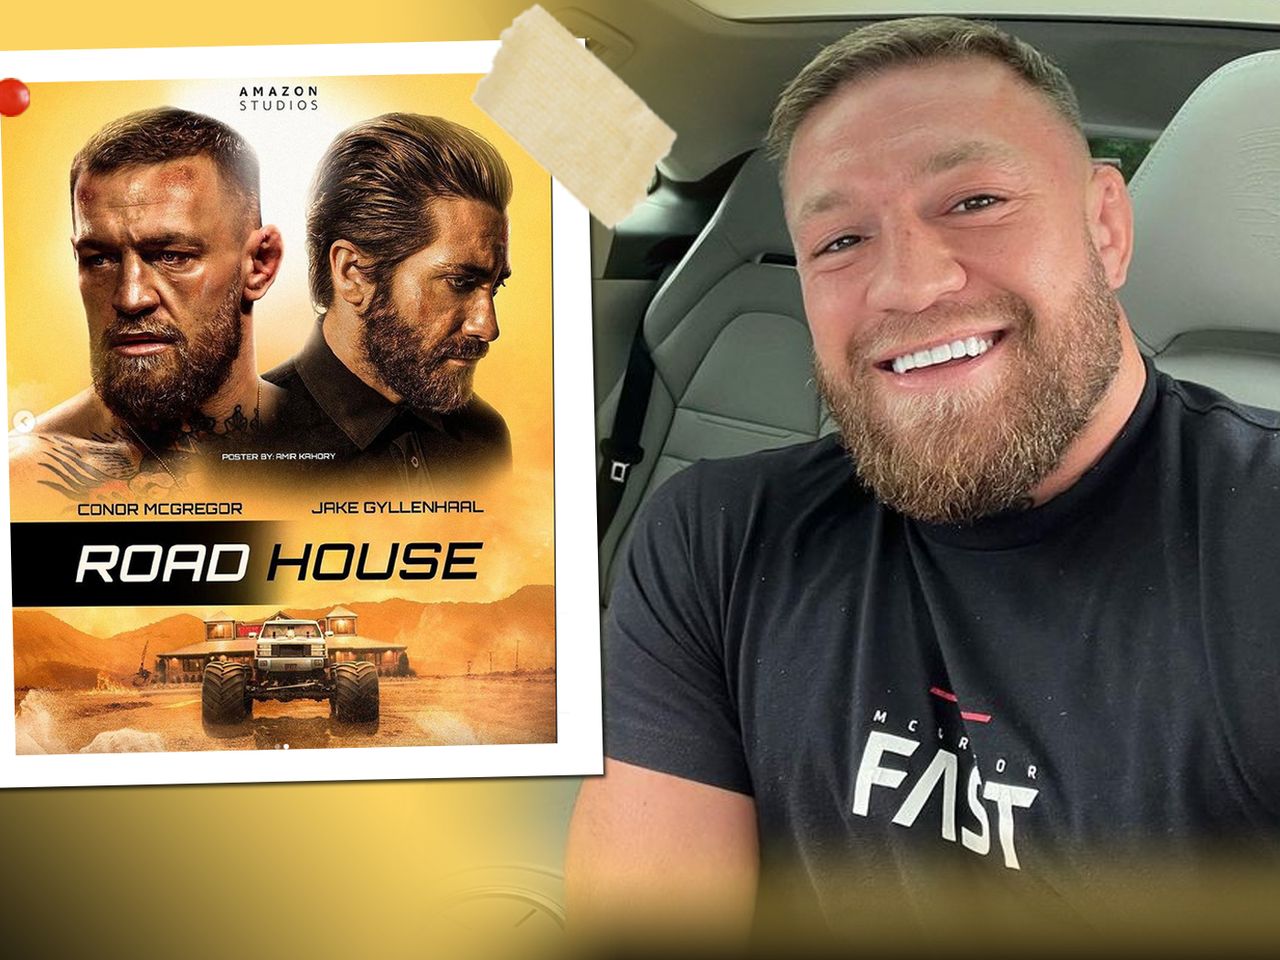 Conor McGregor shares mock-up poster of new Road House movie with